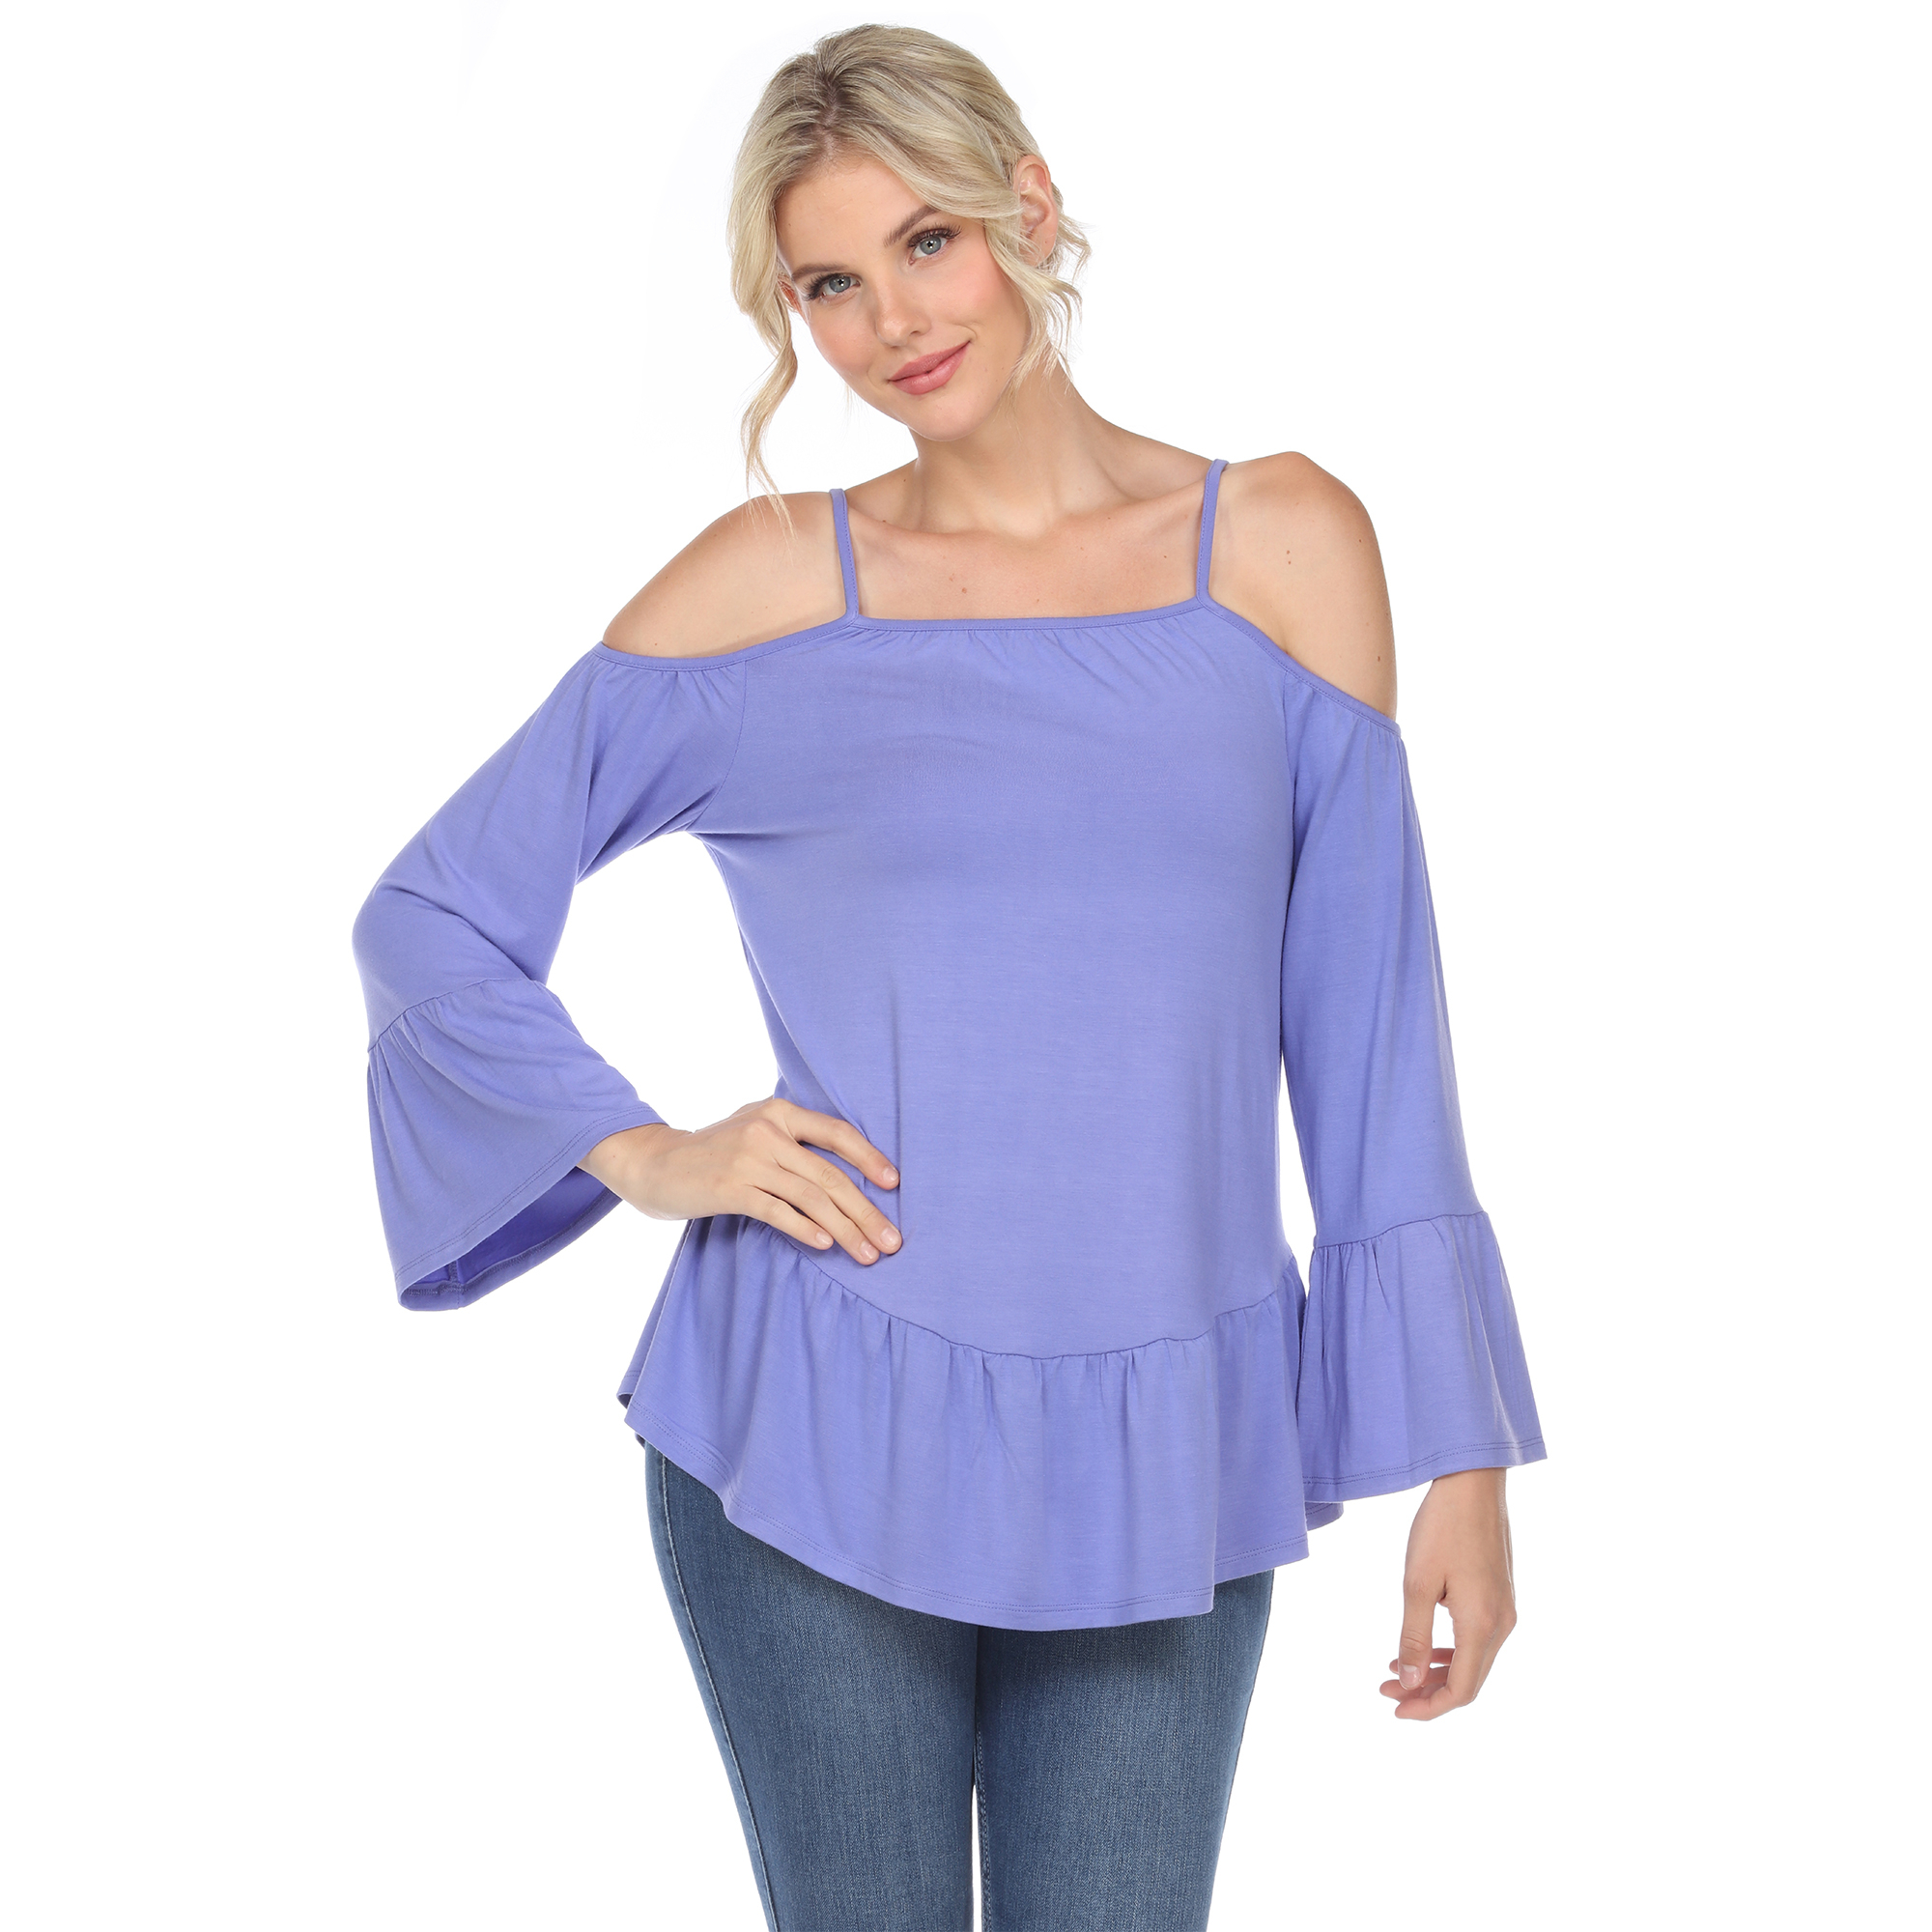 White Mark Women's Cold Shoulder Ruffle Sleeve Top - Purple, Small